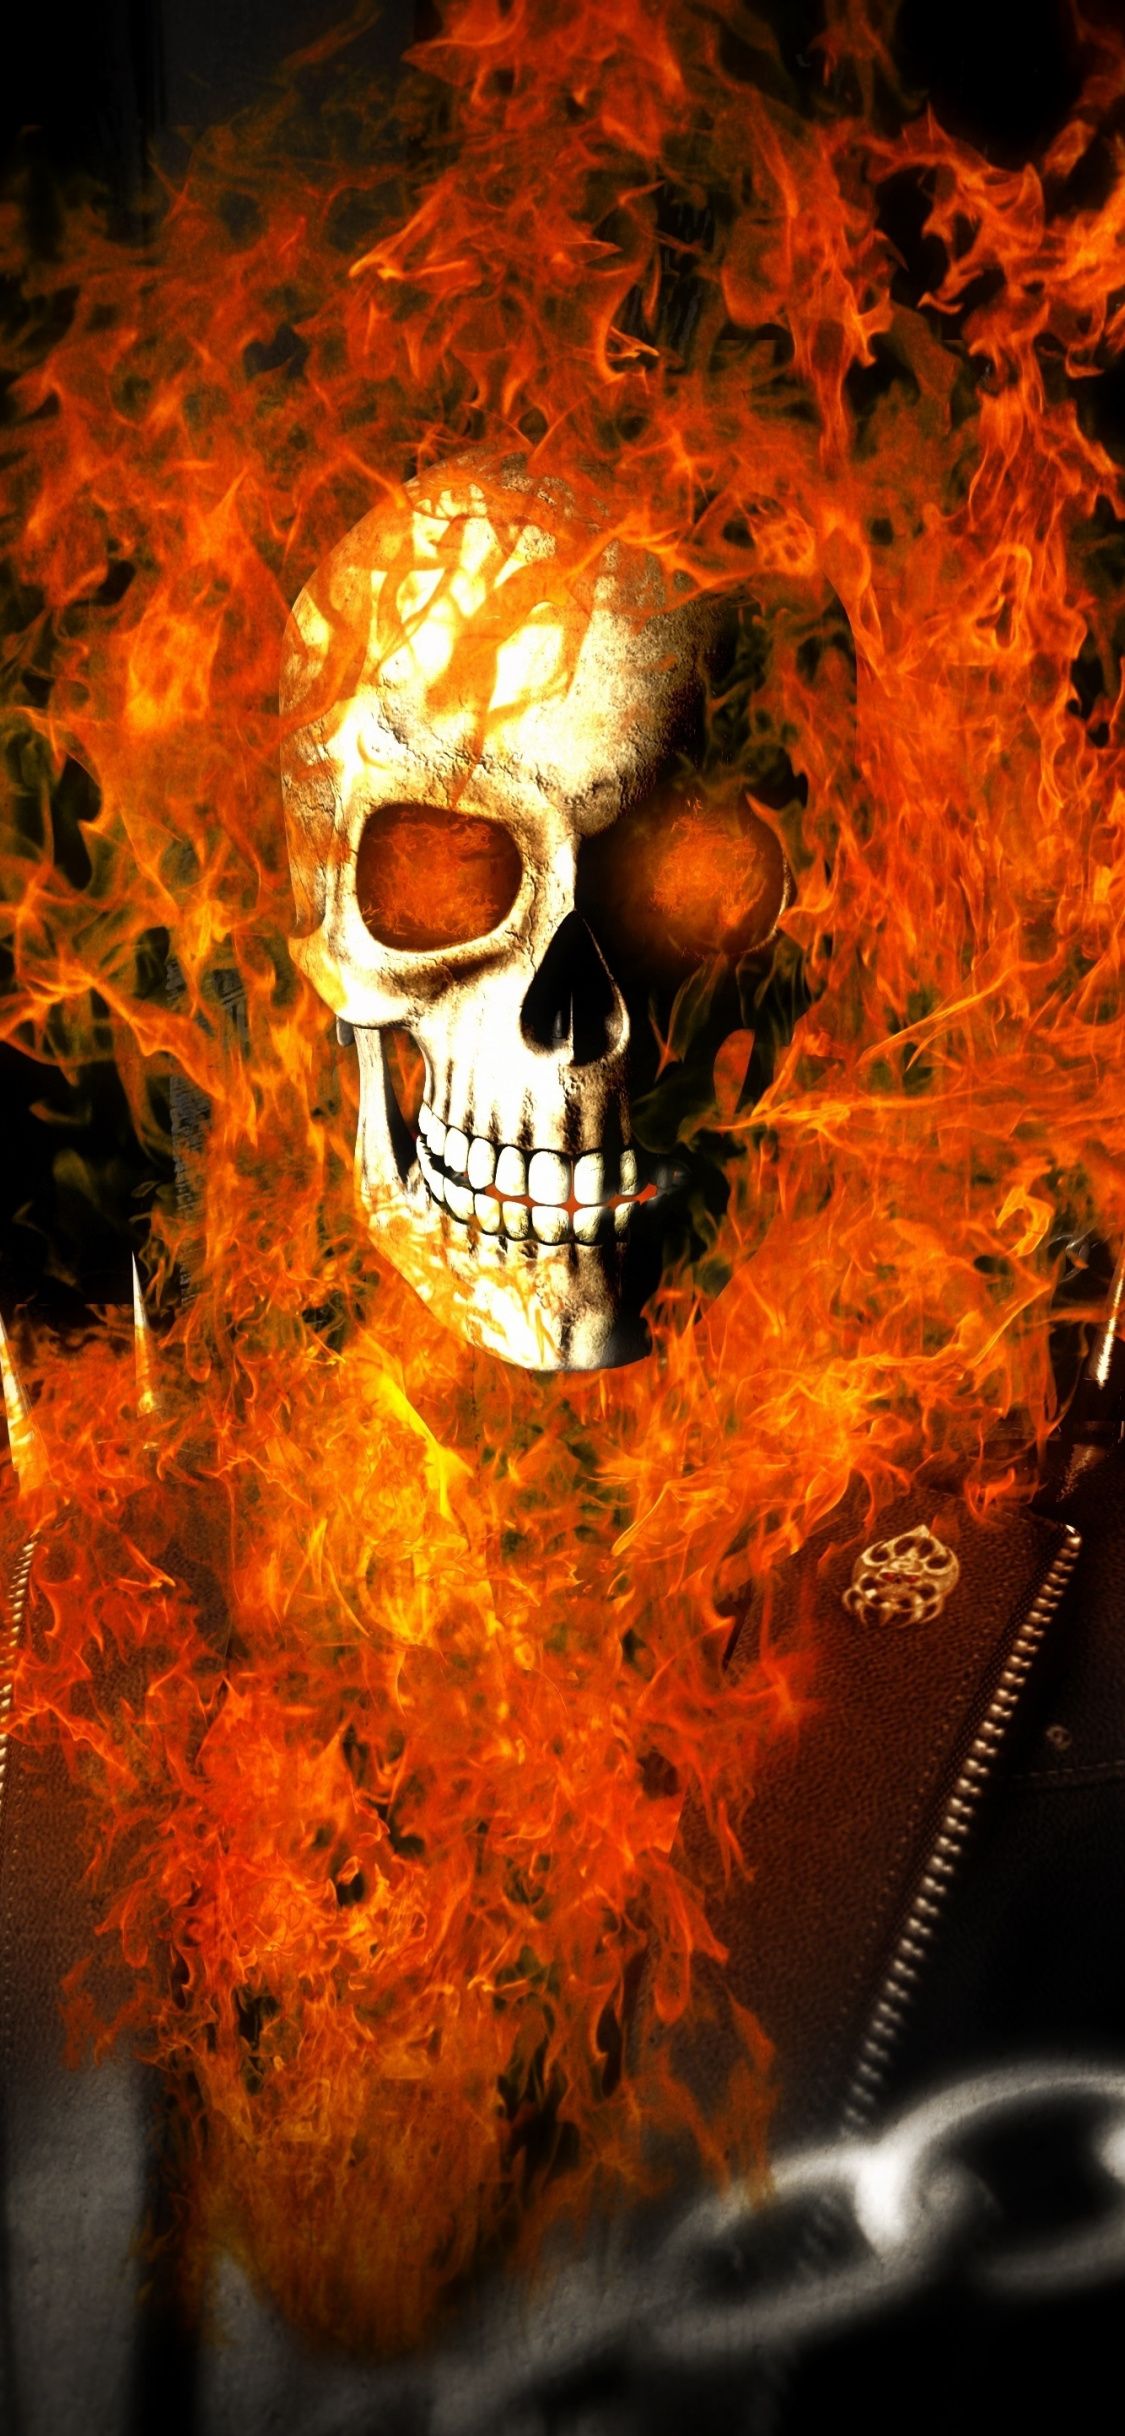 Download 1125x2436 wallpaper skull and fire, ghost rider